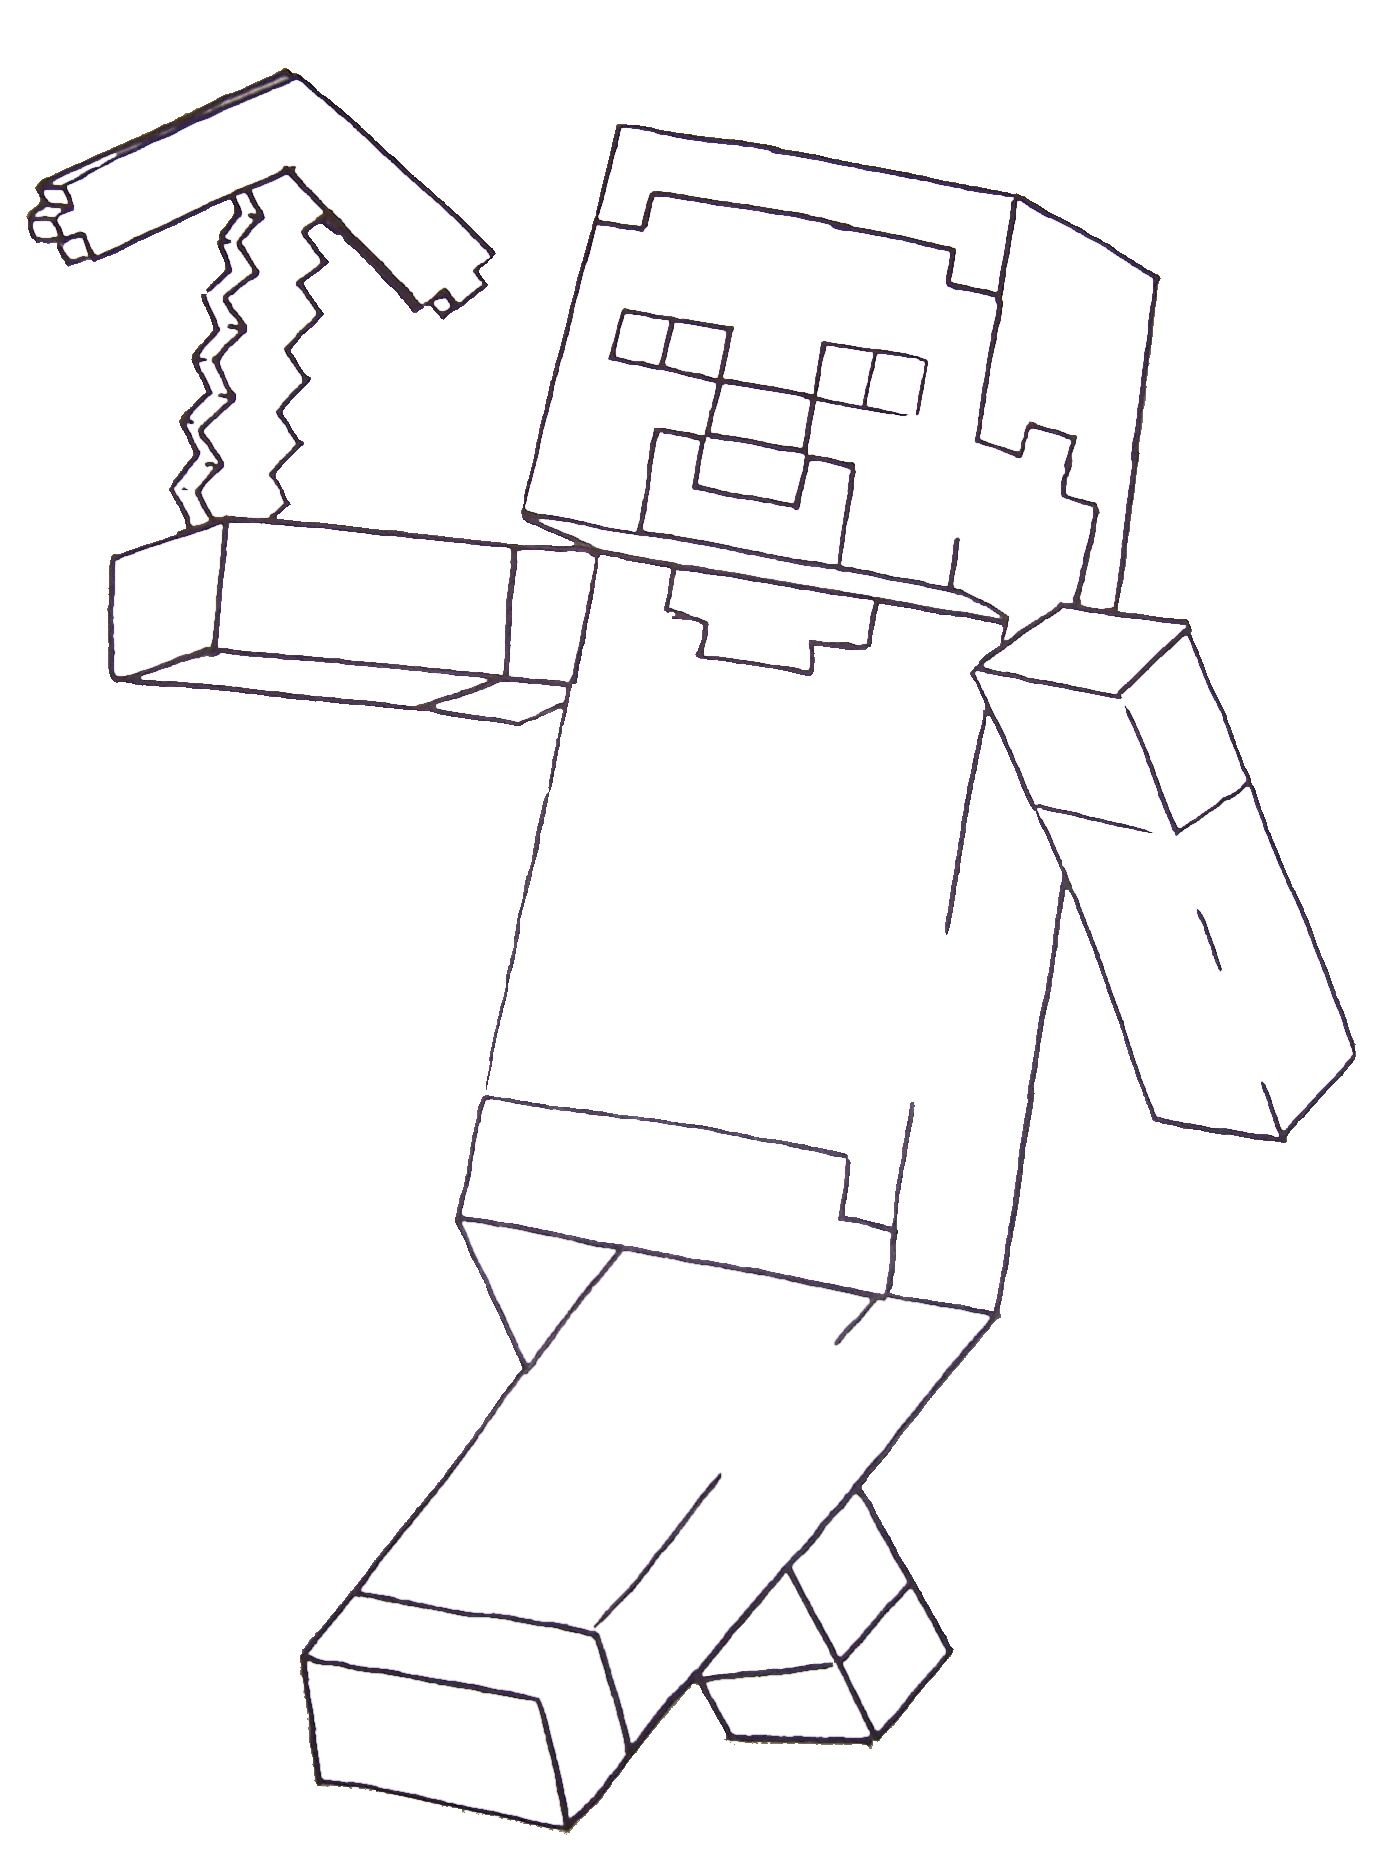 Coloring Pages : Fantastic Minecraft Coloring Pages For Kids ...